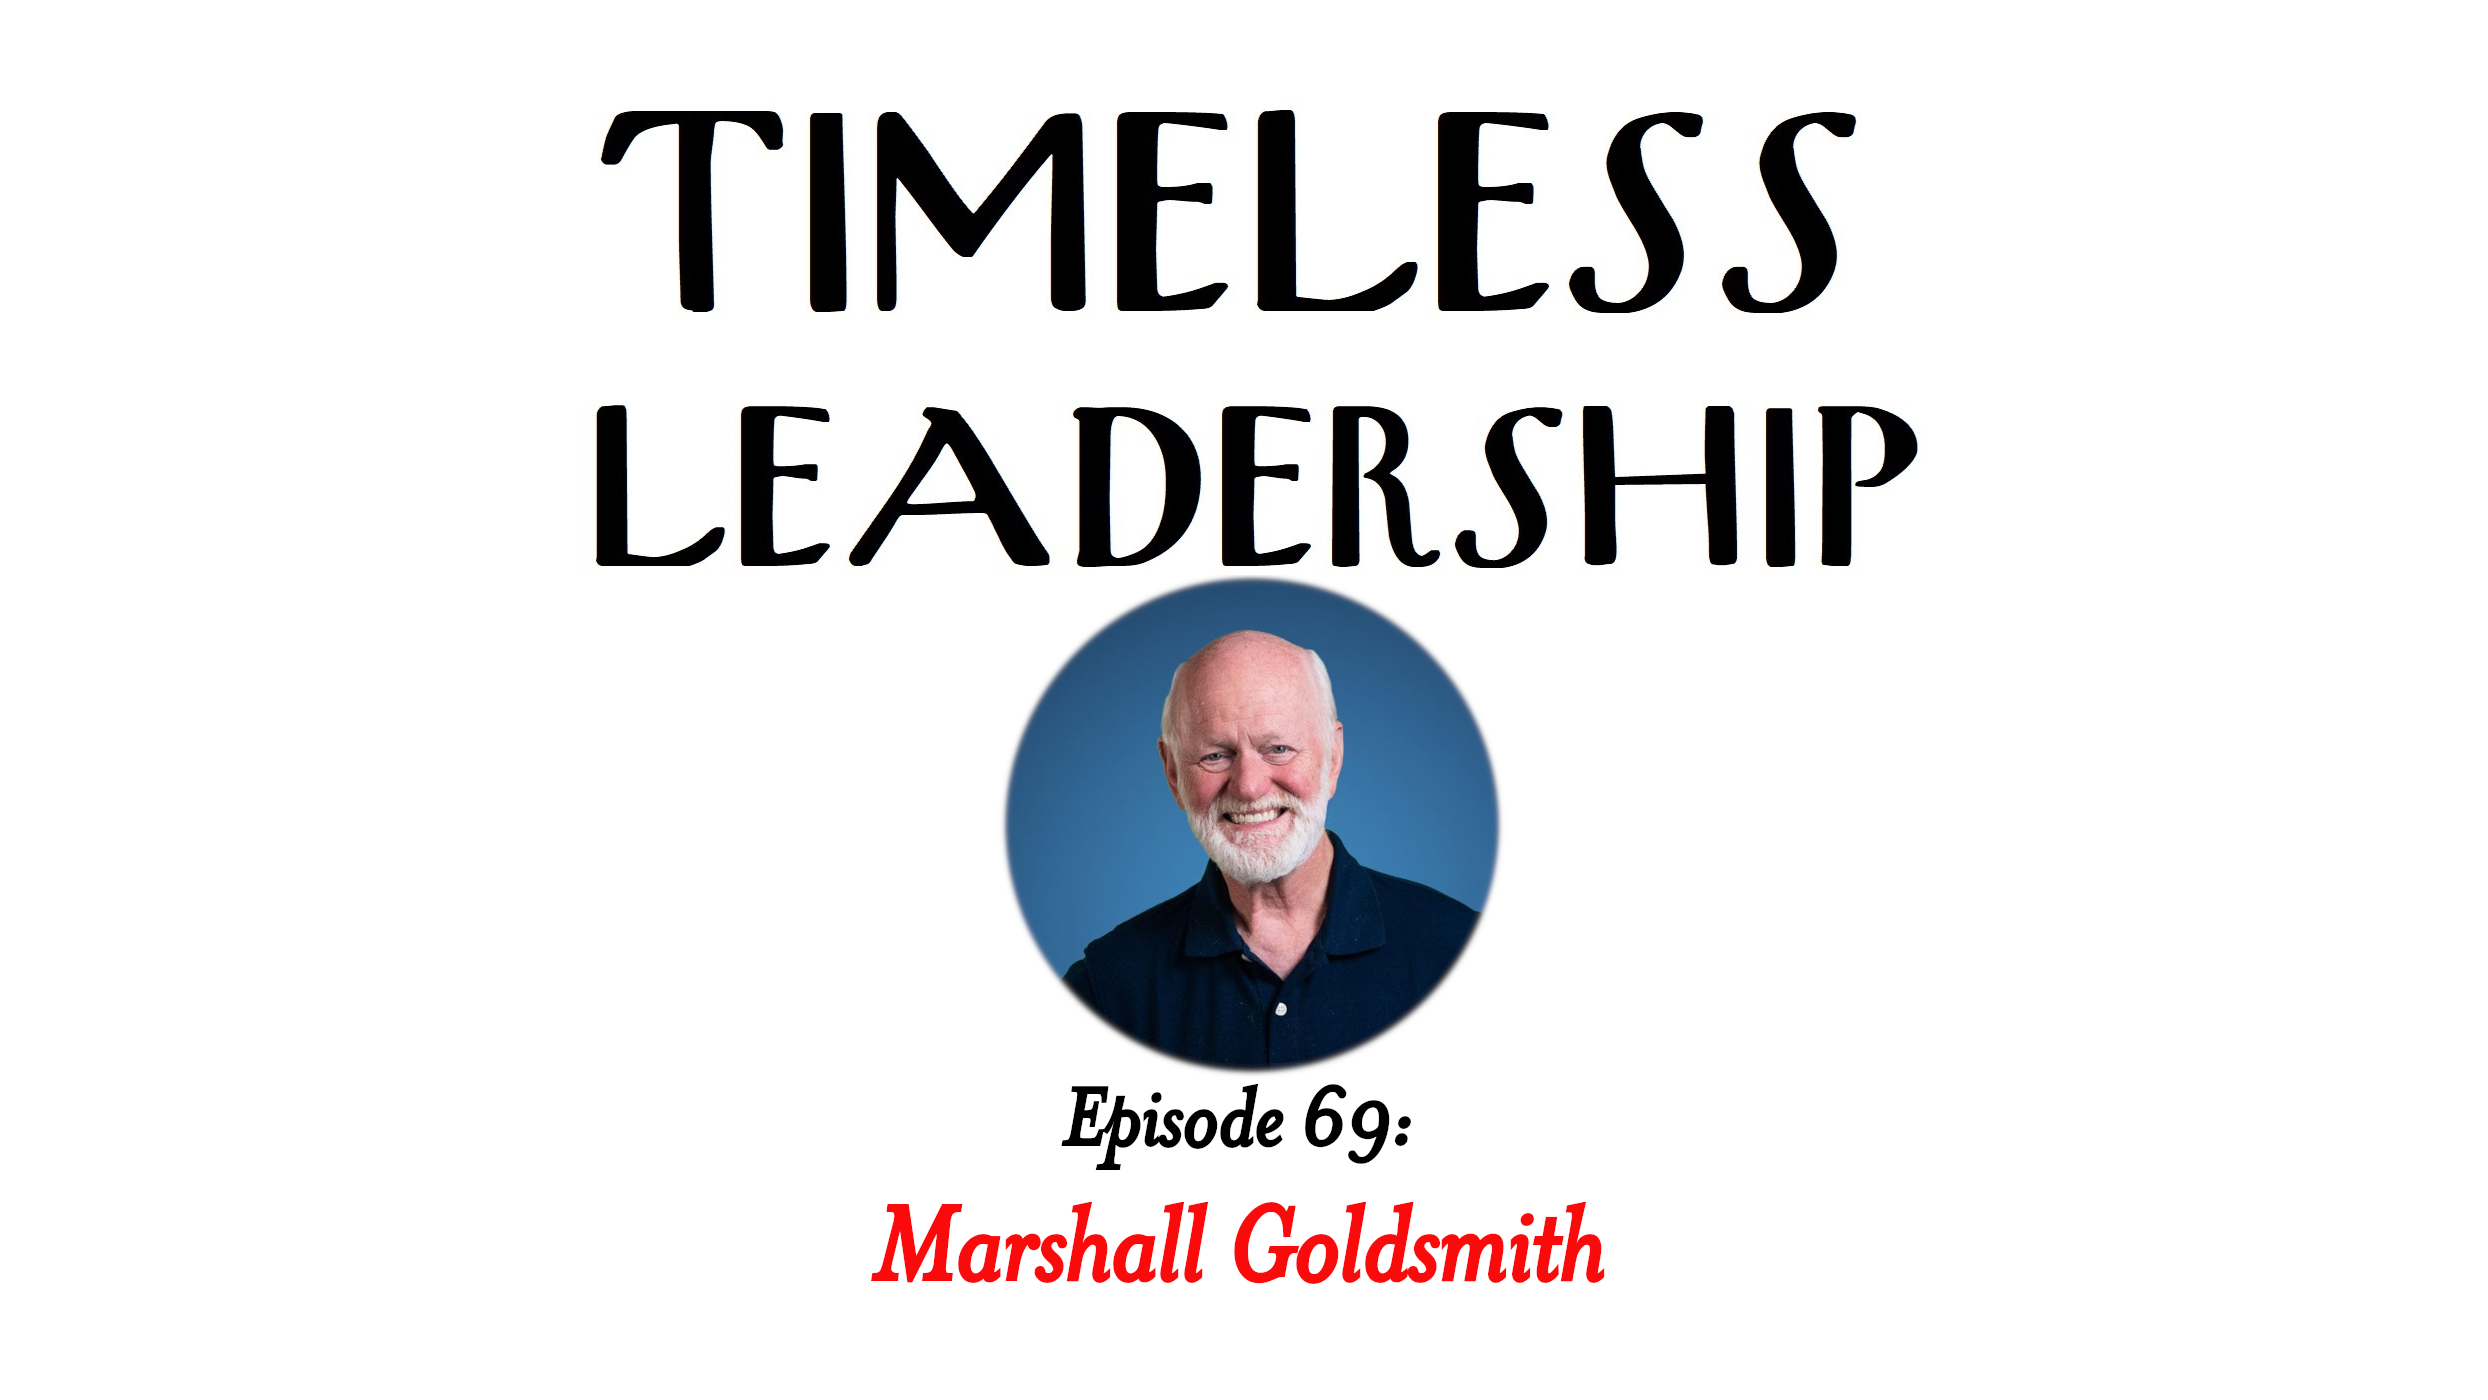 Episode 69: The Earned Life with Marshall Goldsmith